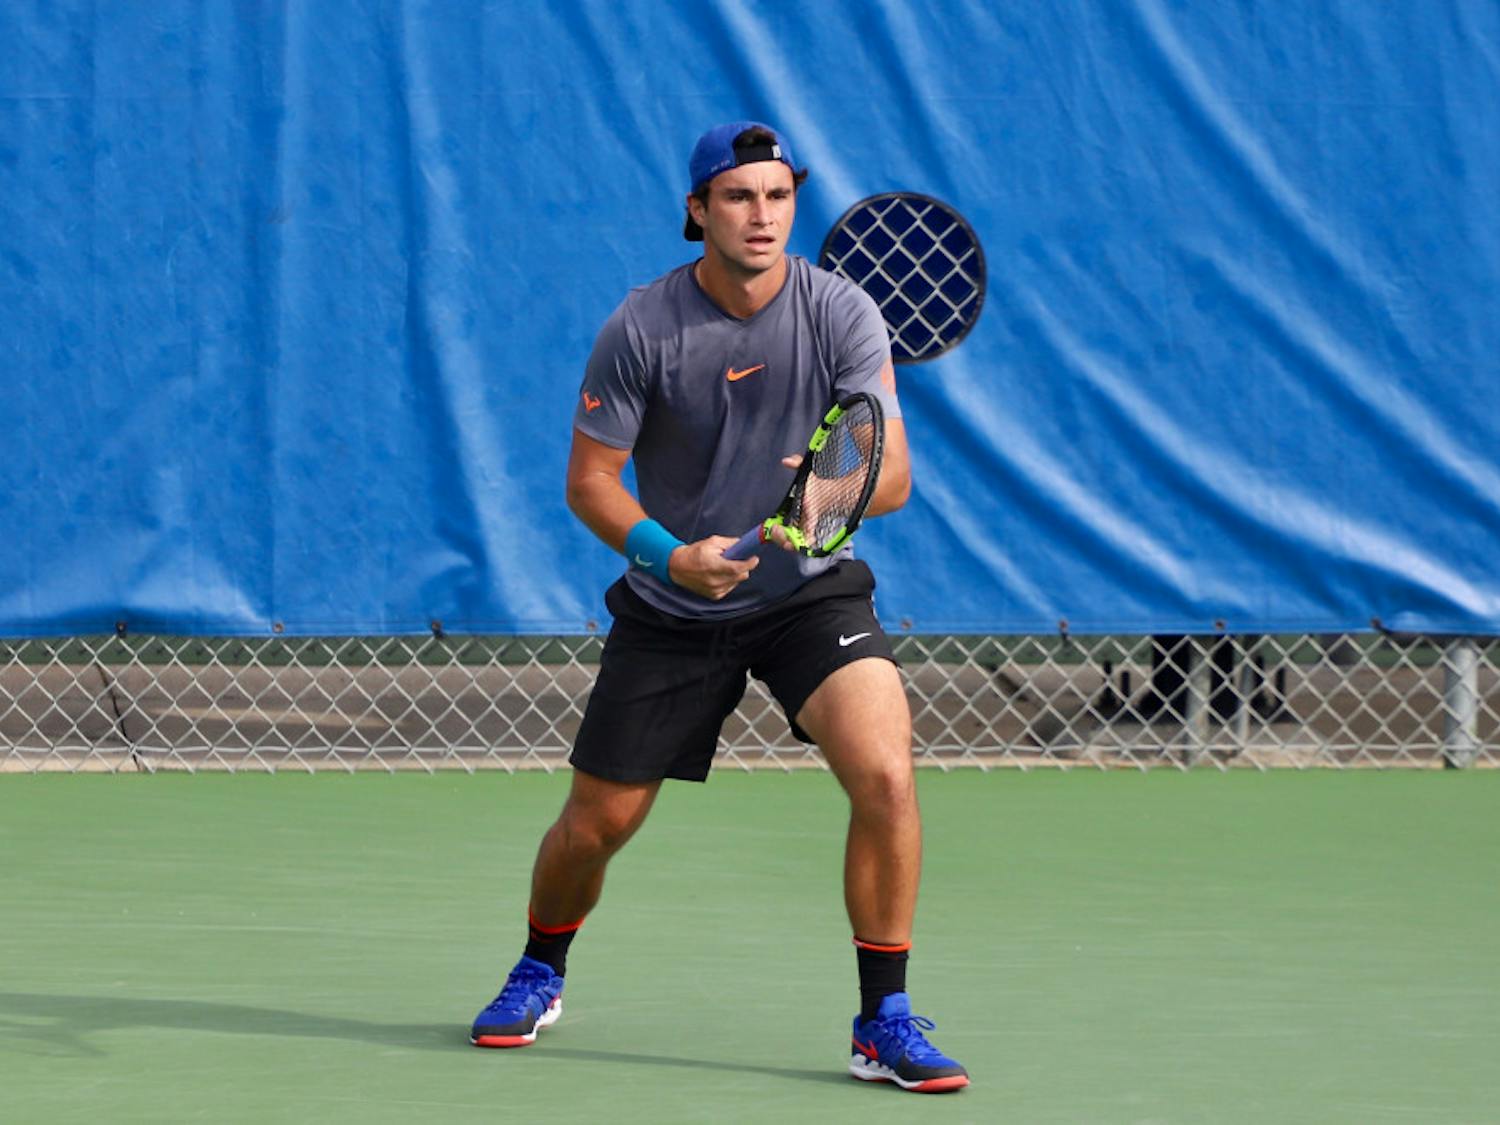 Senior Duarte Vale at the ITA Tournament in Gainesville last season. This fall, the Gators will be limited to a three-match, conference only schedule.